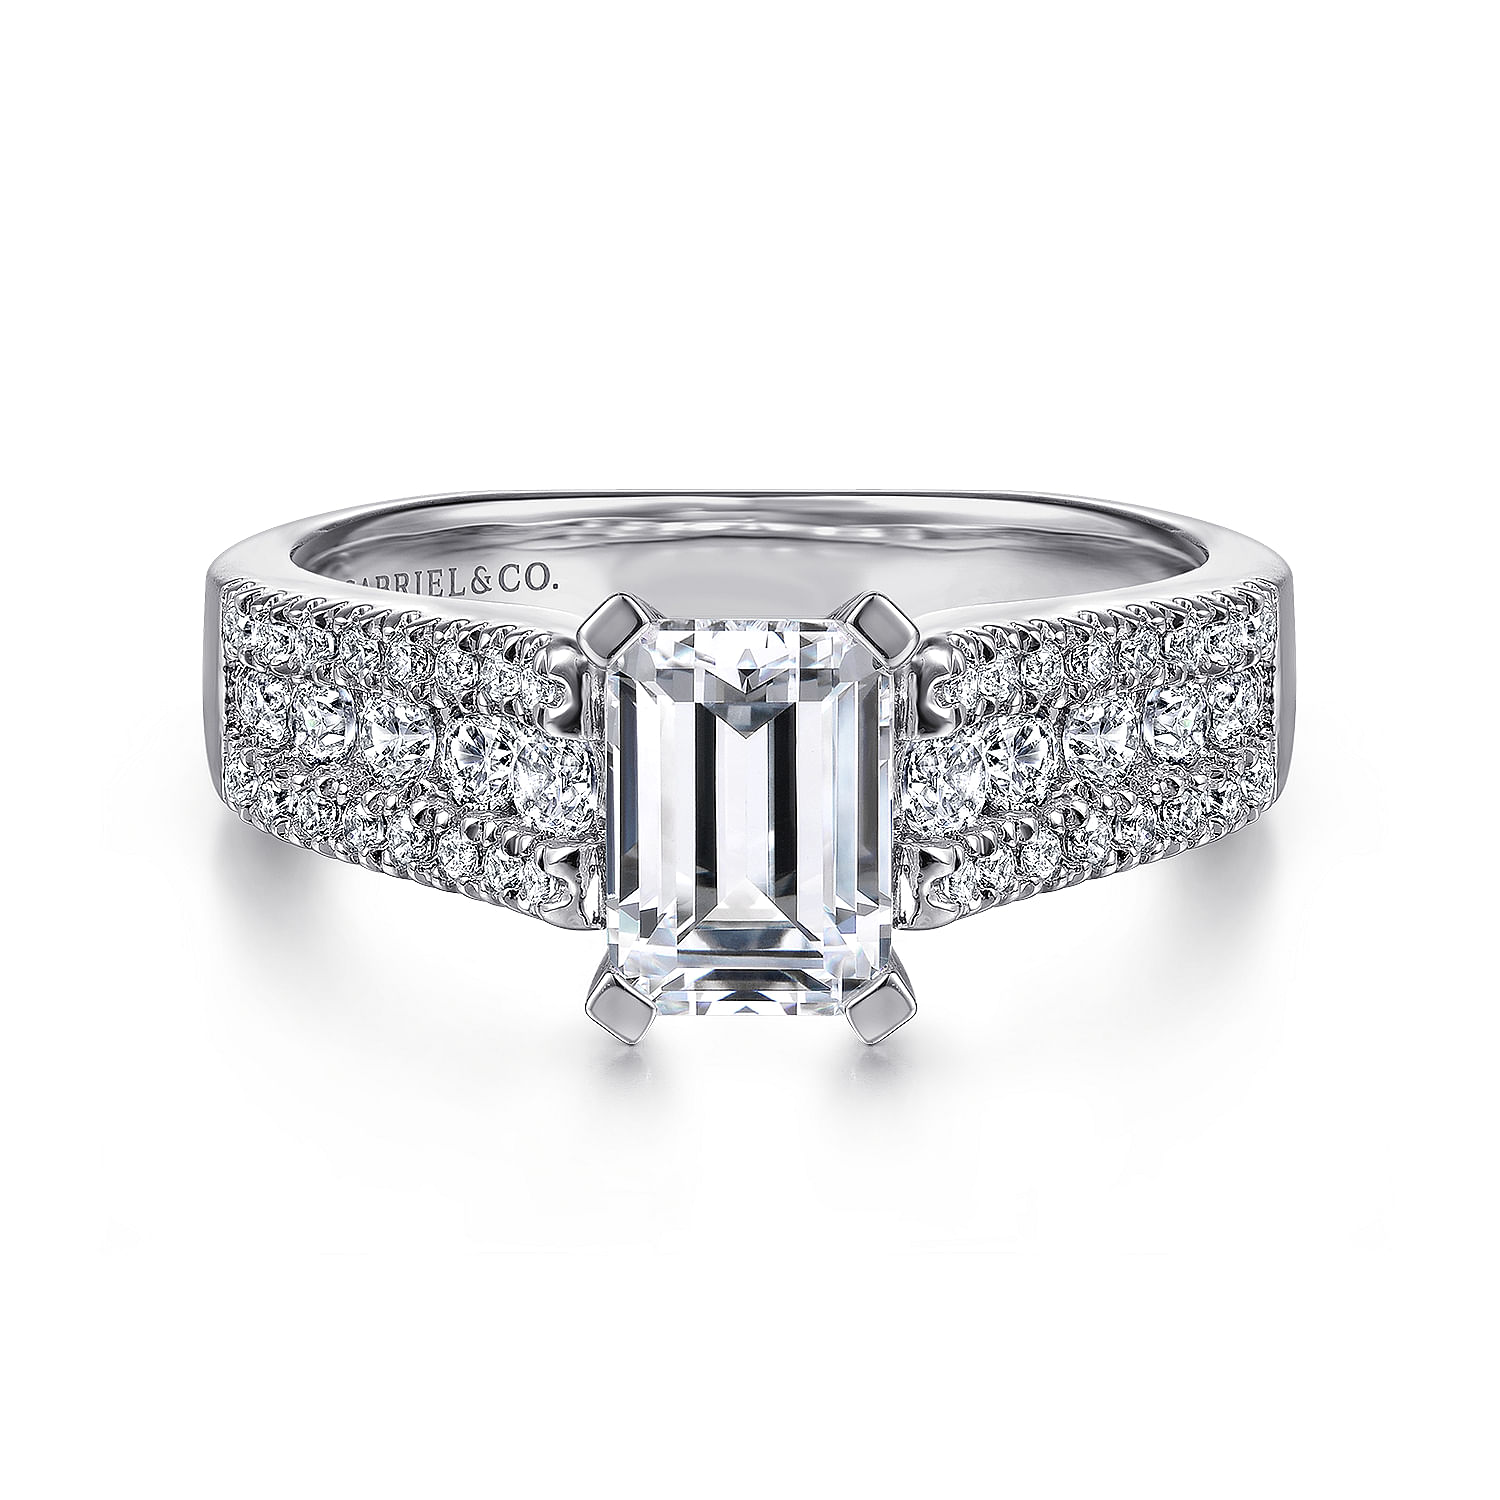 14K White Gold Wide Band Emerald Cut Diamond Engagement Ring